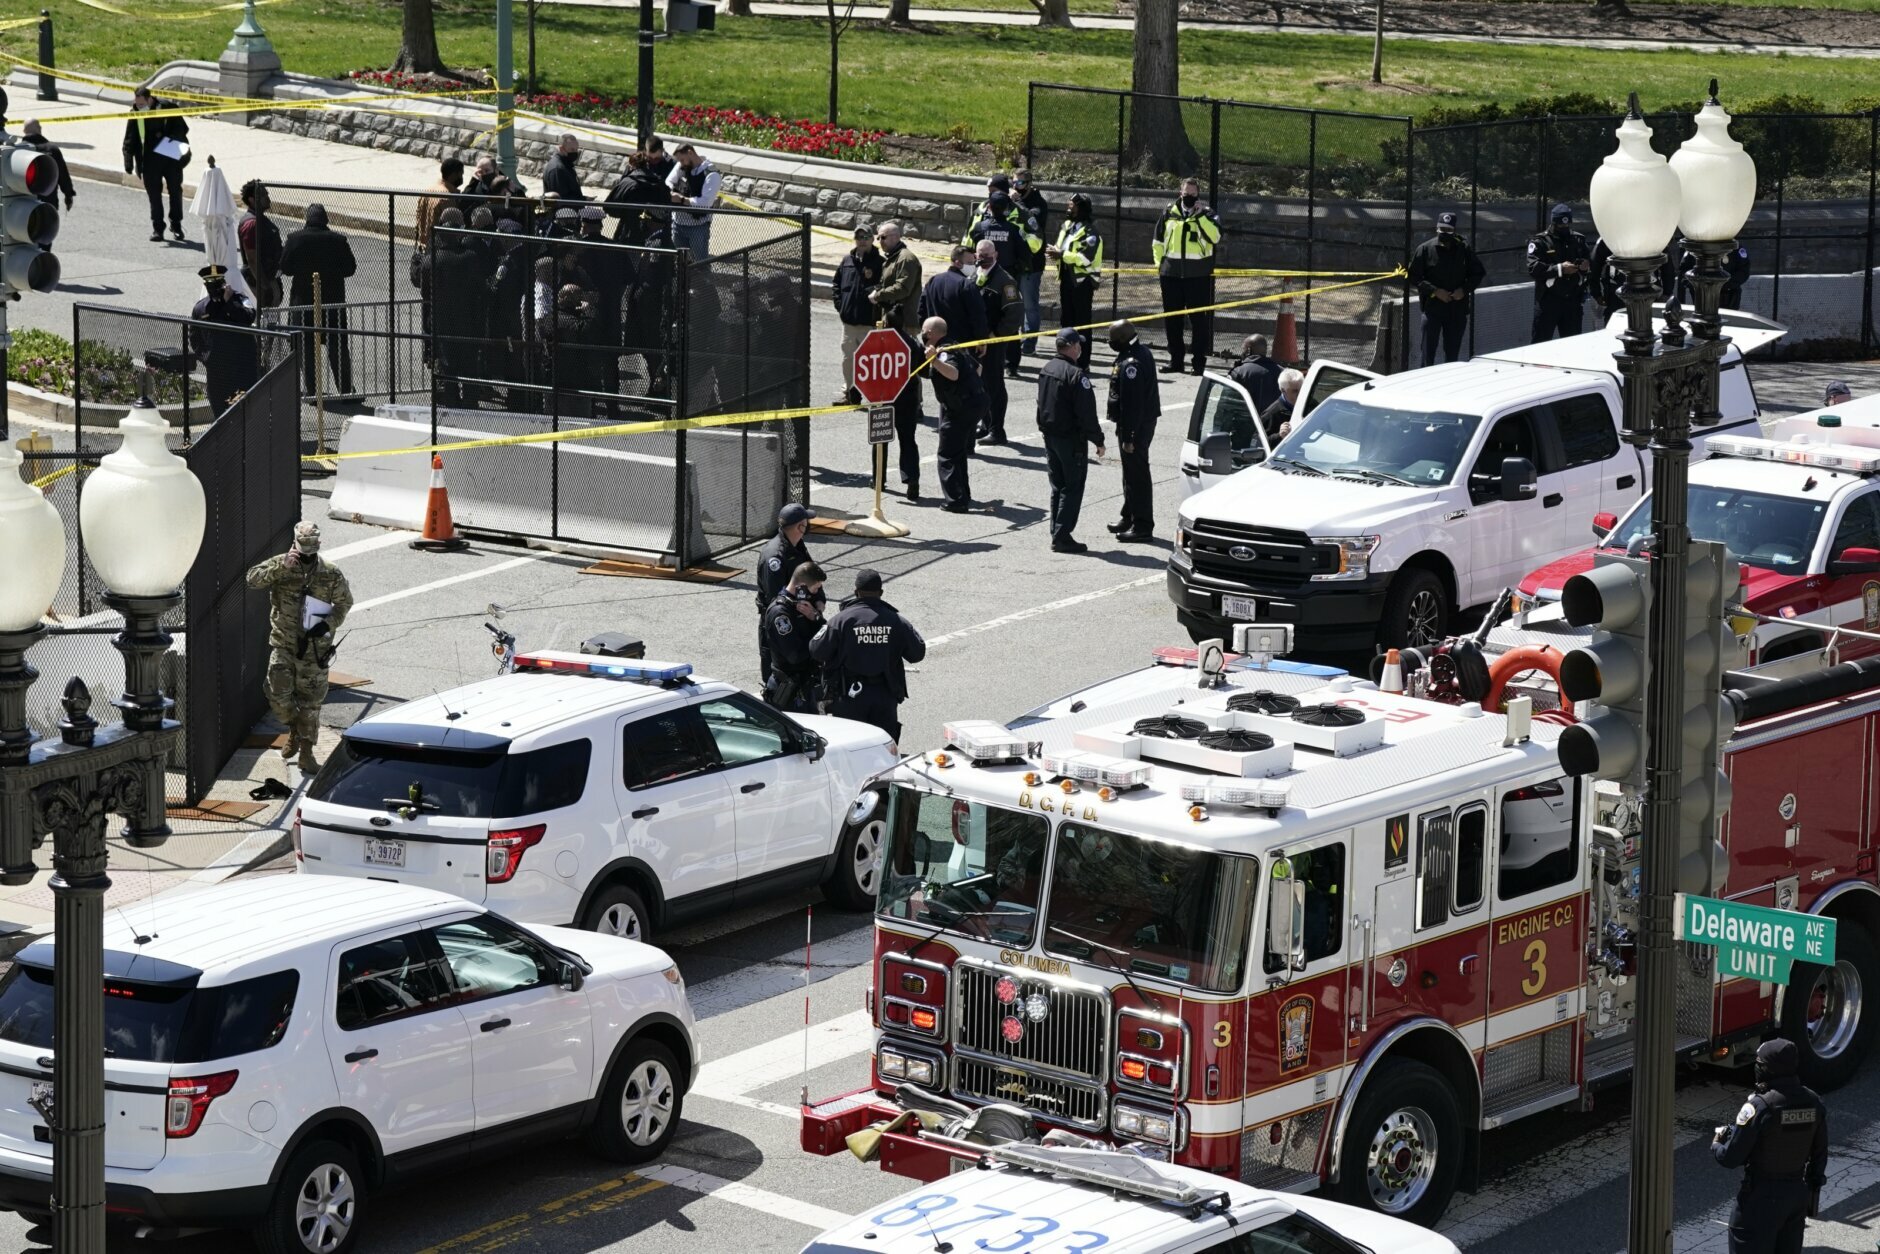 Police and fire officials stand near a car that crashed into a barrier on Capitol Hill in Washington, Friday, April 2, 2021. (AP Photo/J. Scott Applewhite)